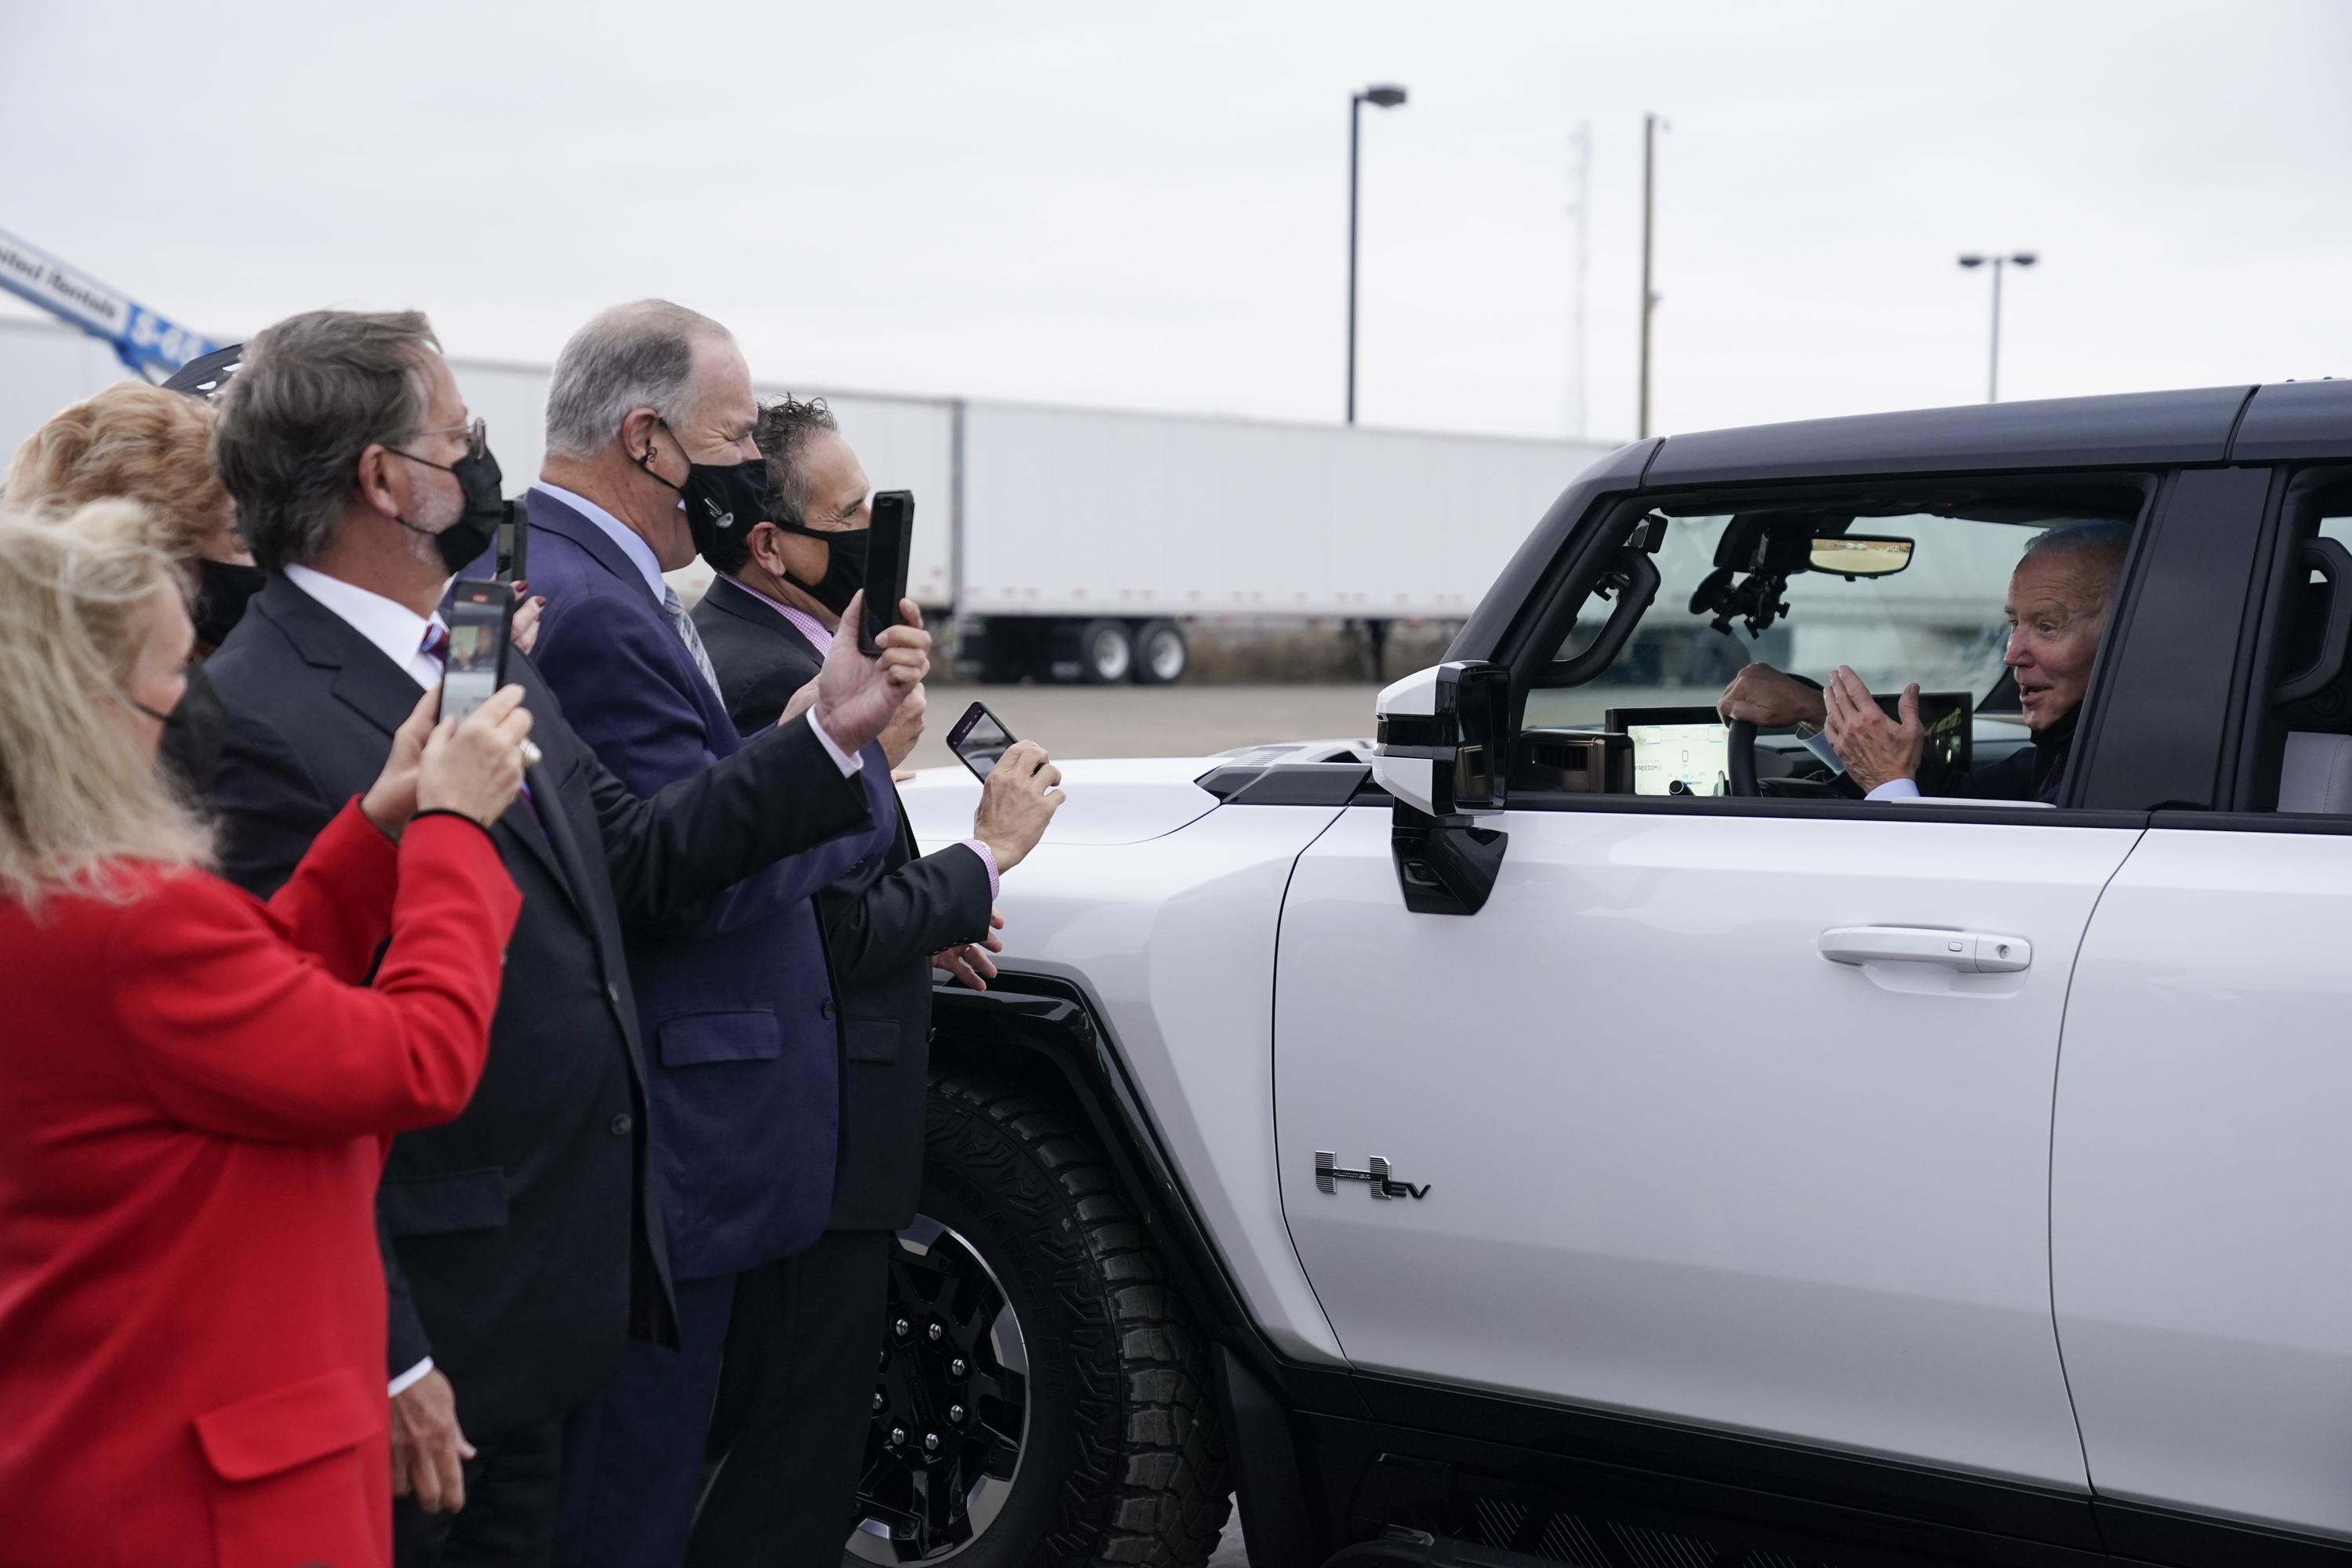 Biden pushes electric vehicle chargers as energy costs spike AP News